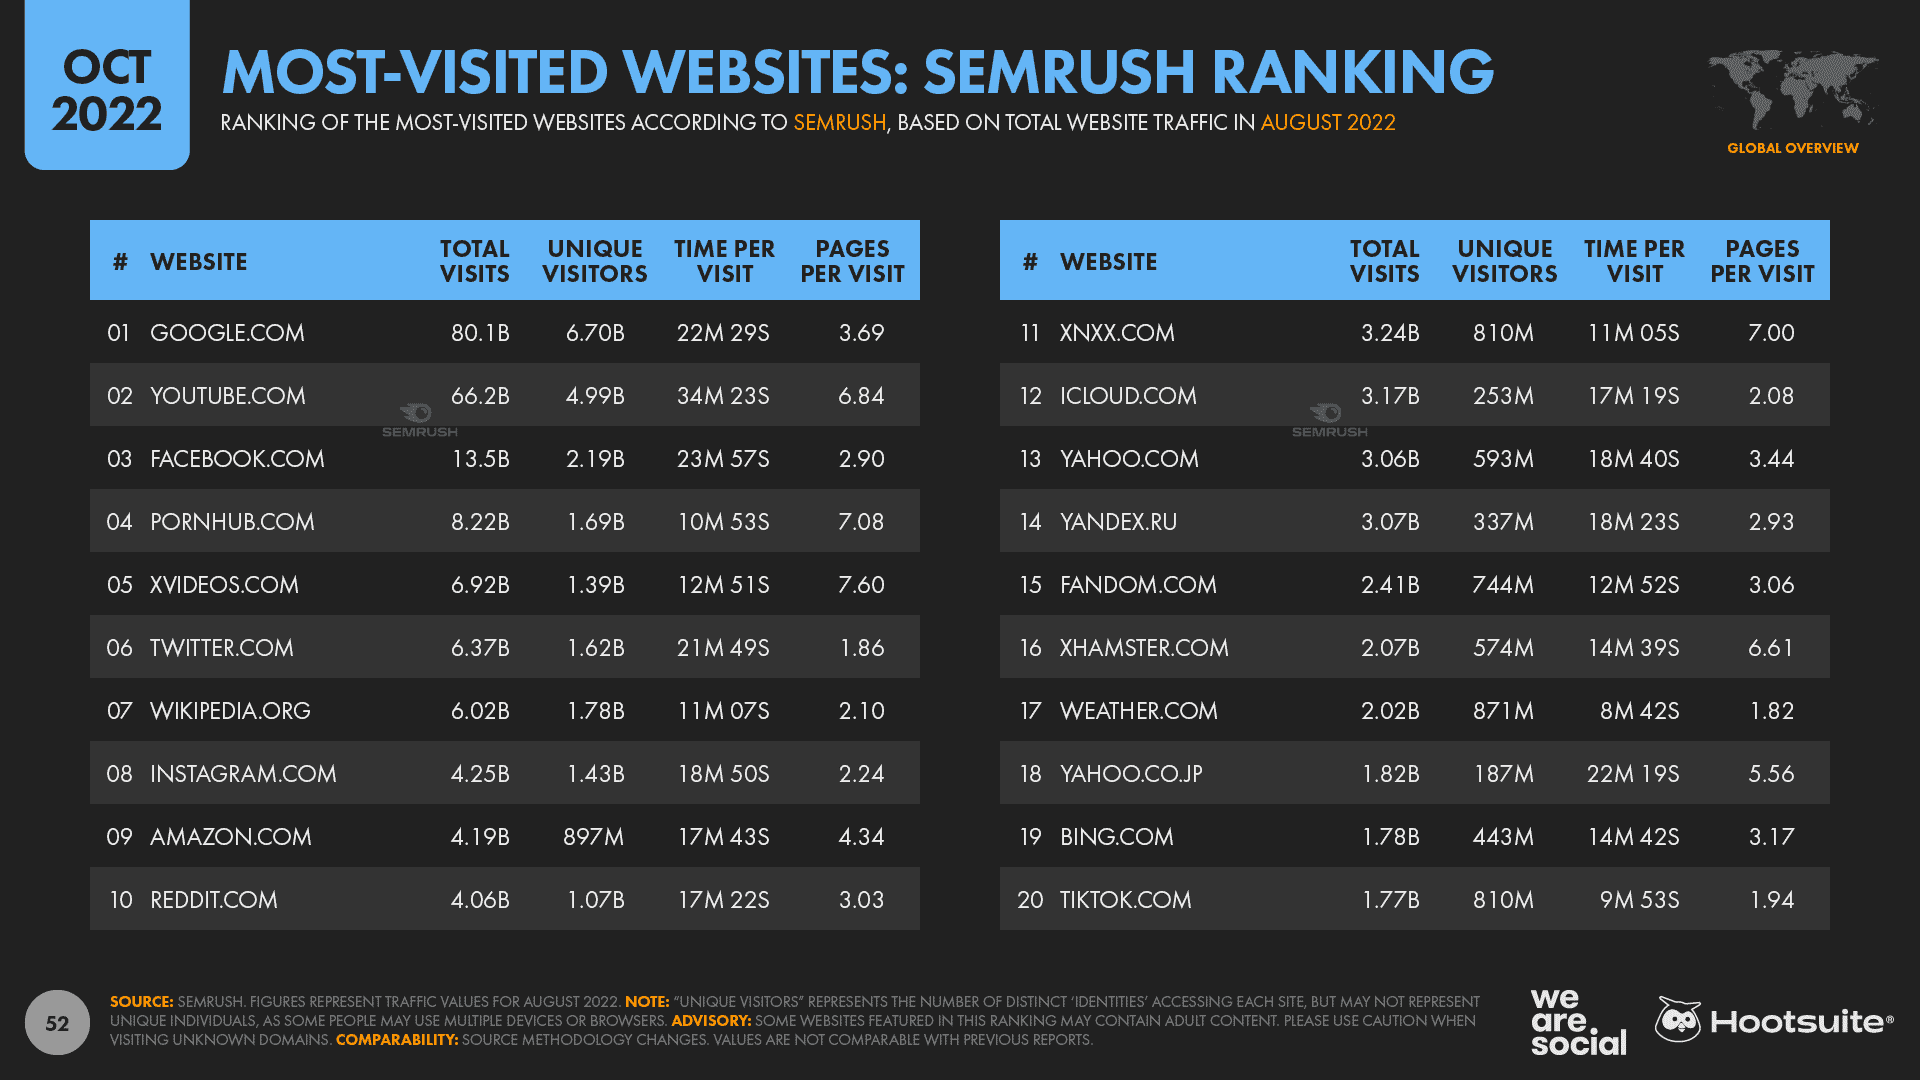 Chart showing website rankings by visitors